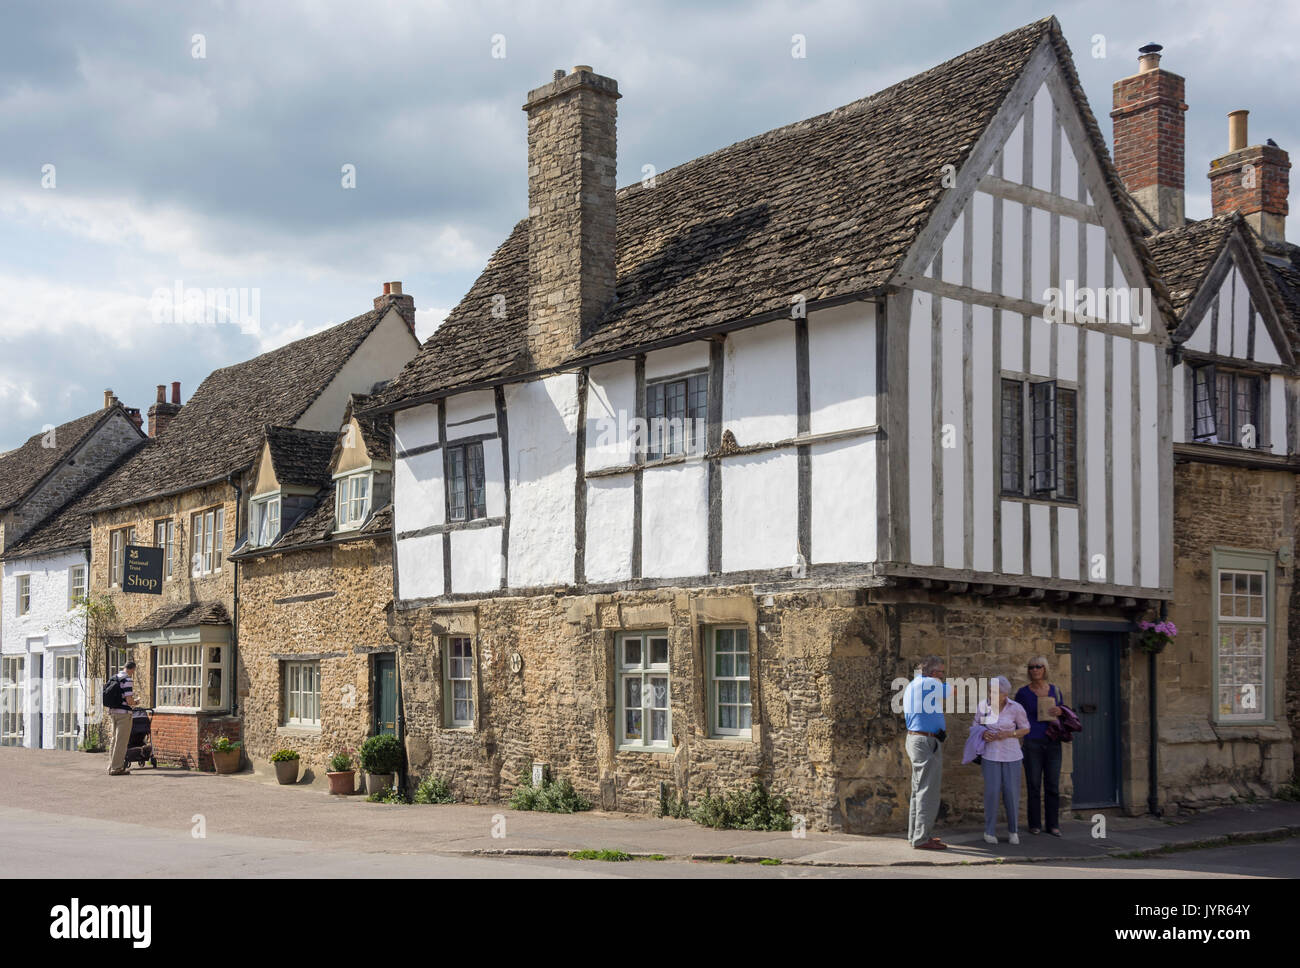 Timber-framed houses, High Street, Lacock, Wiltshire, England, United Kingdom Stock Photo